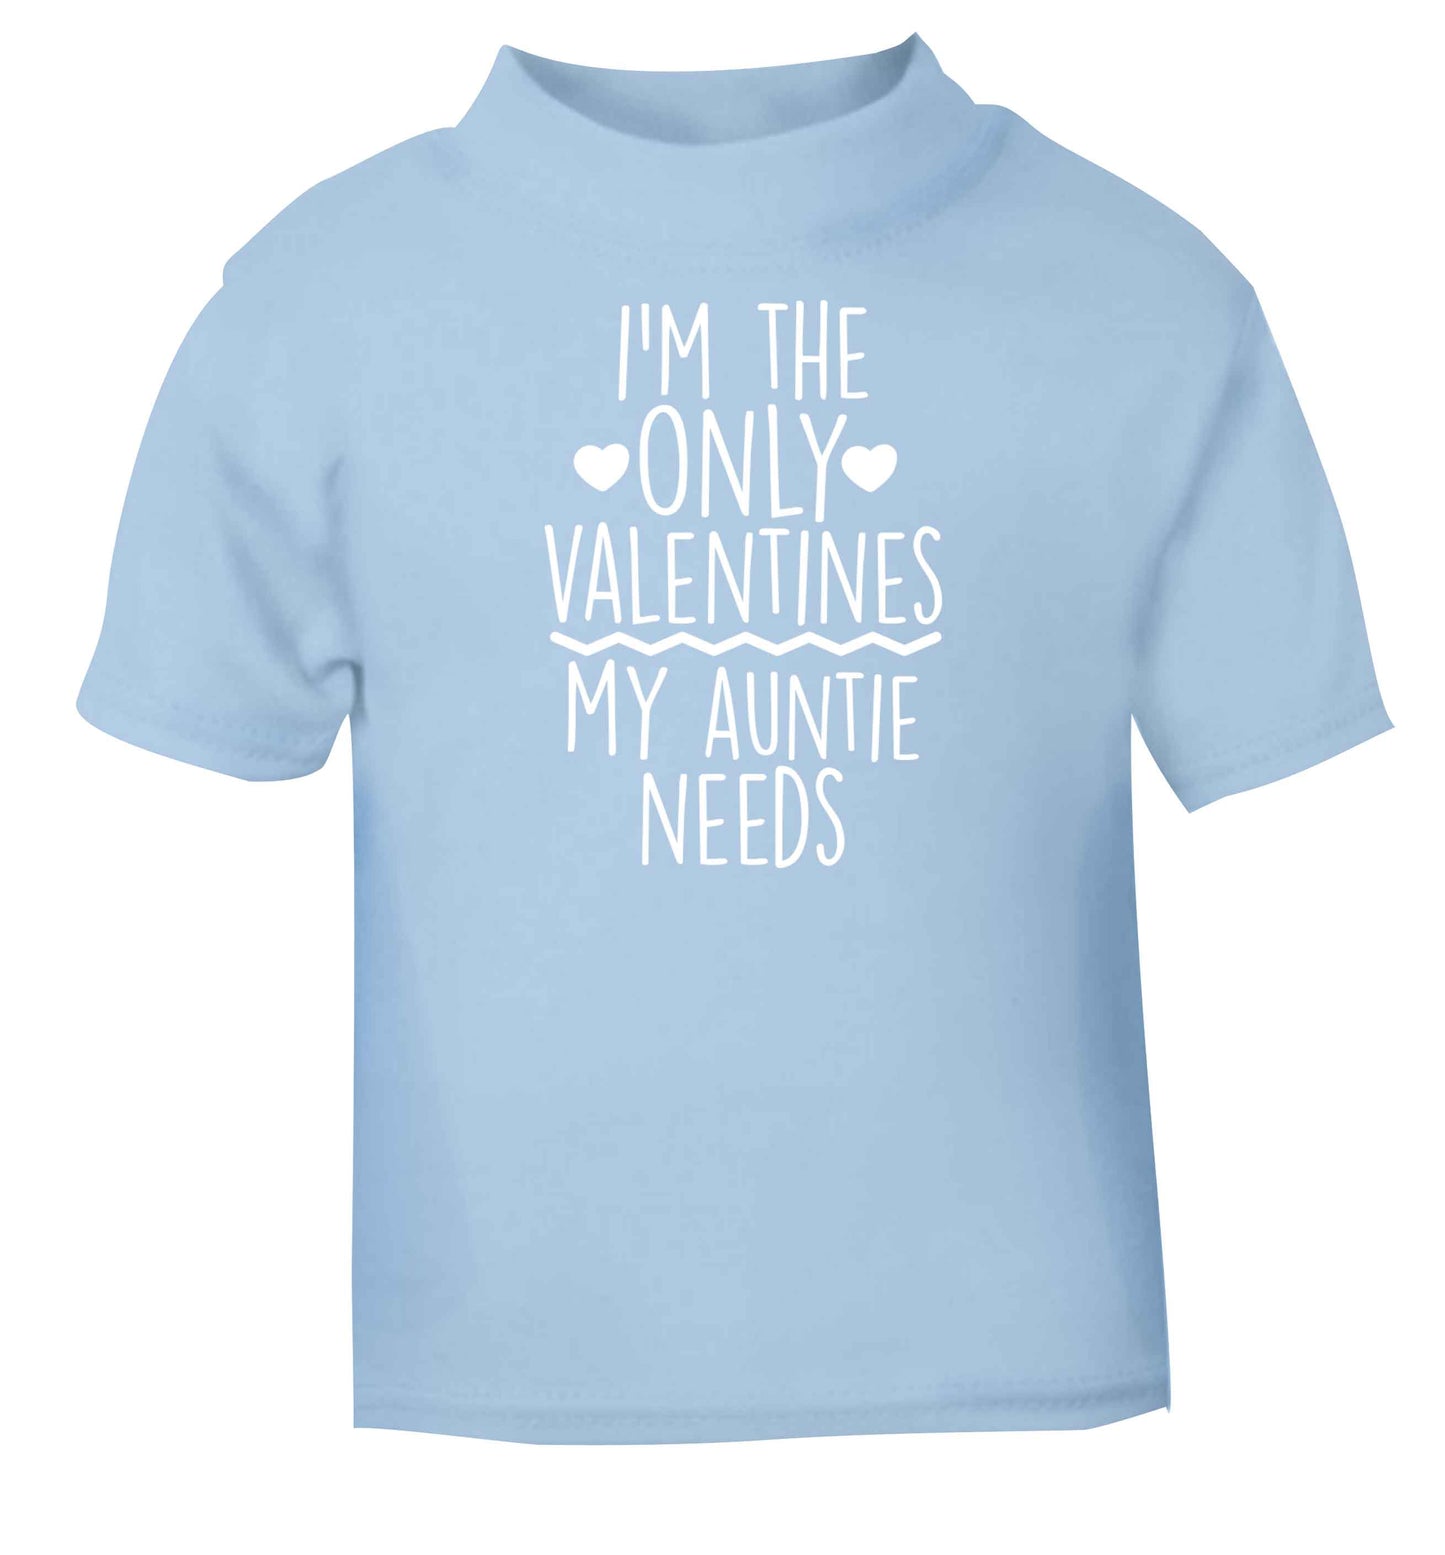 I'm the only valentines my auntie needs light blue baby toddler Tshirt 2 Years